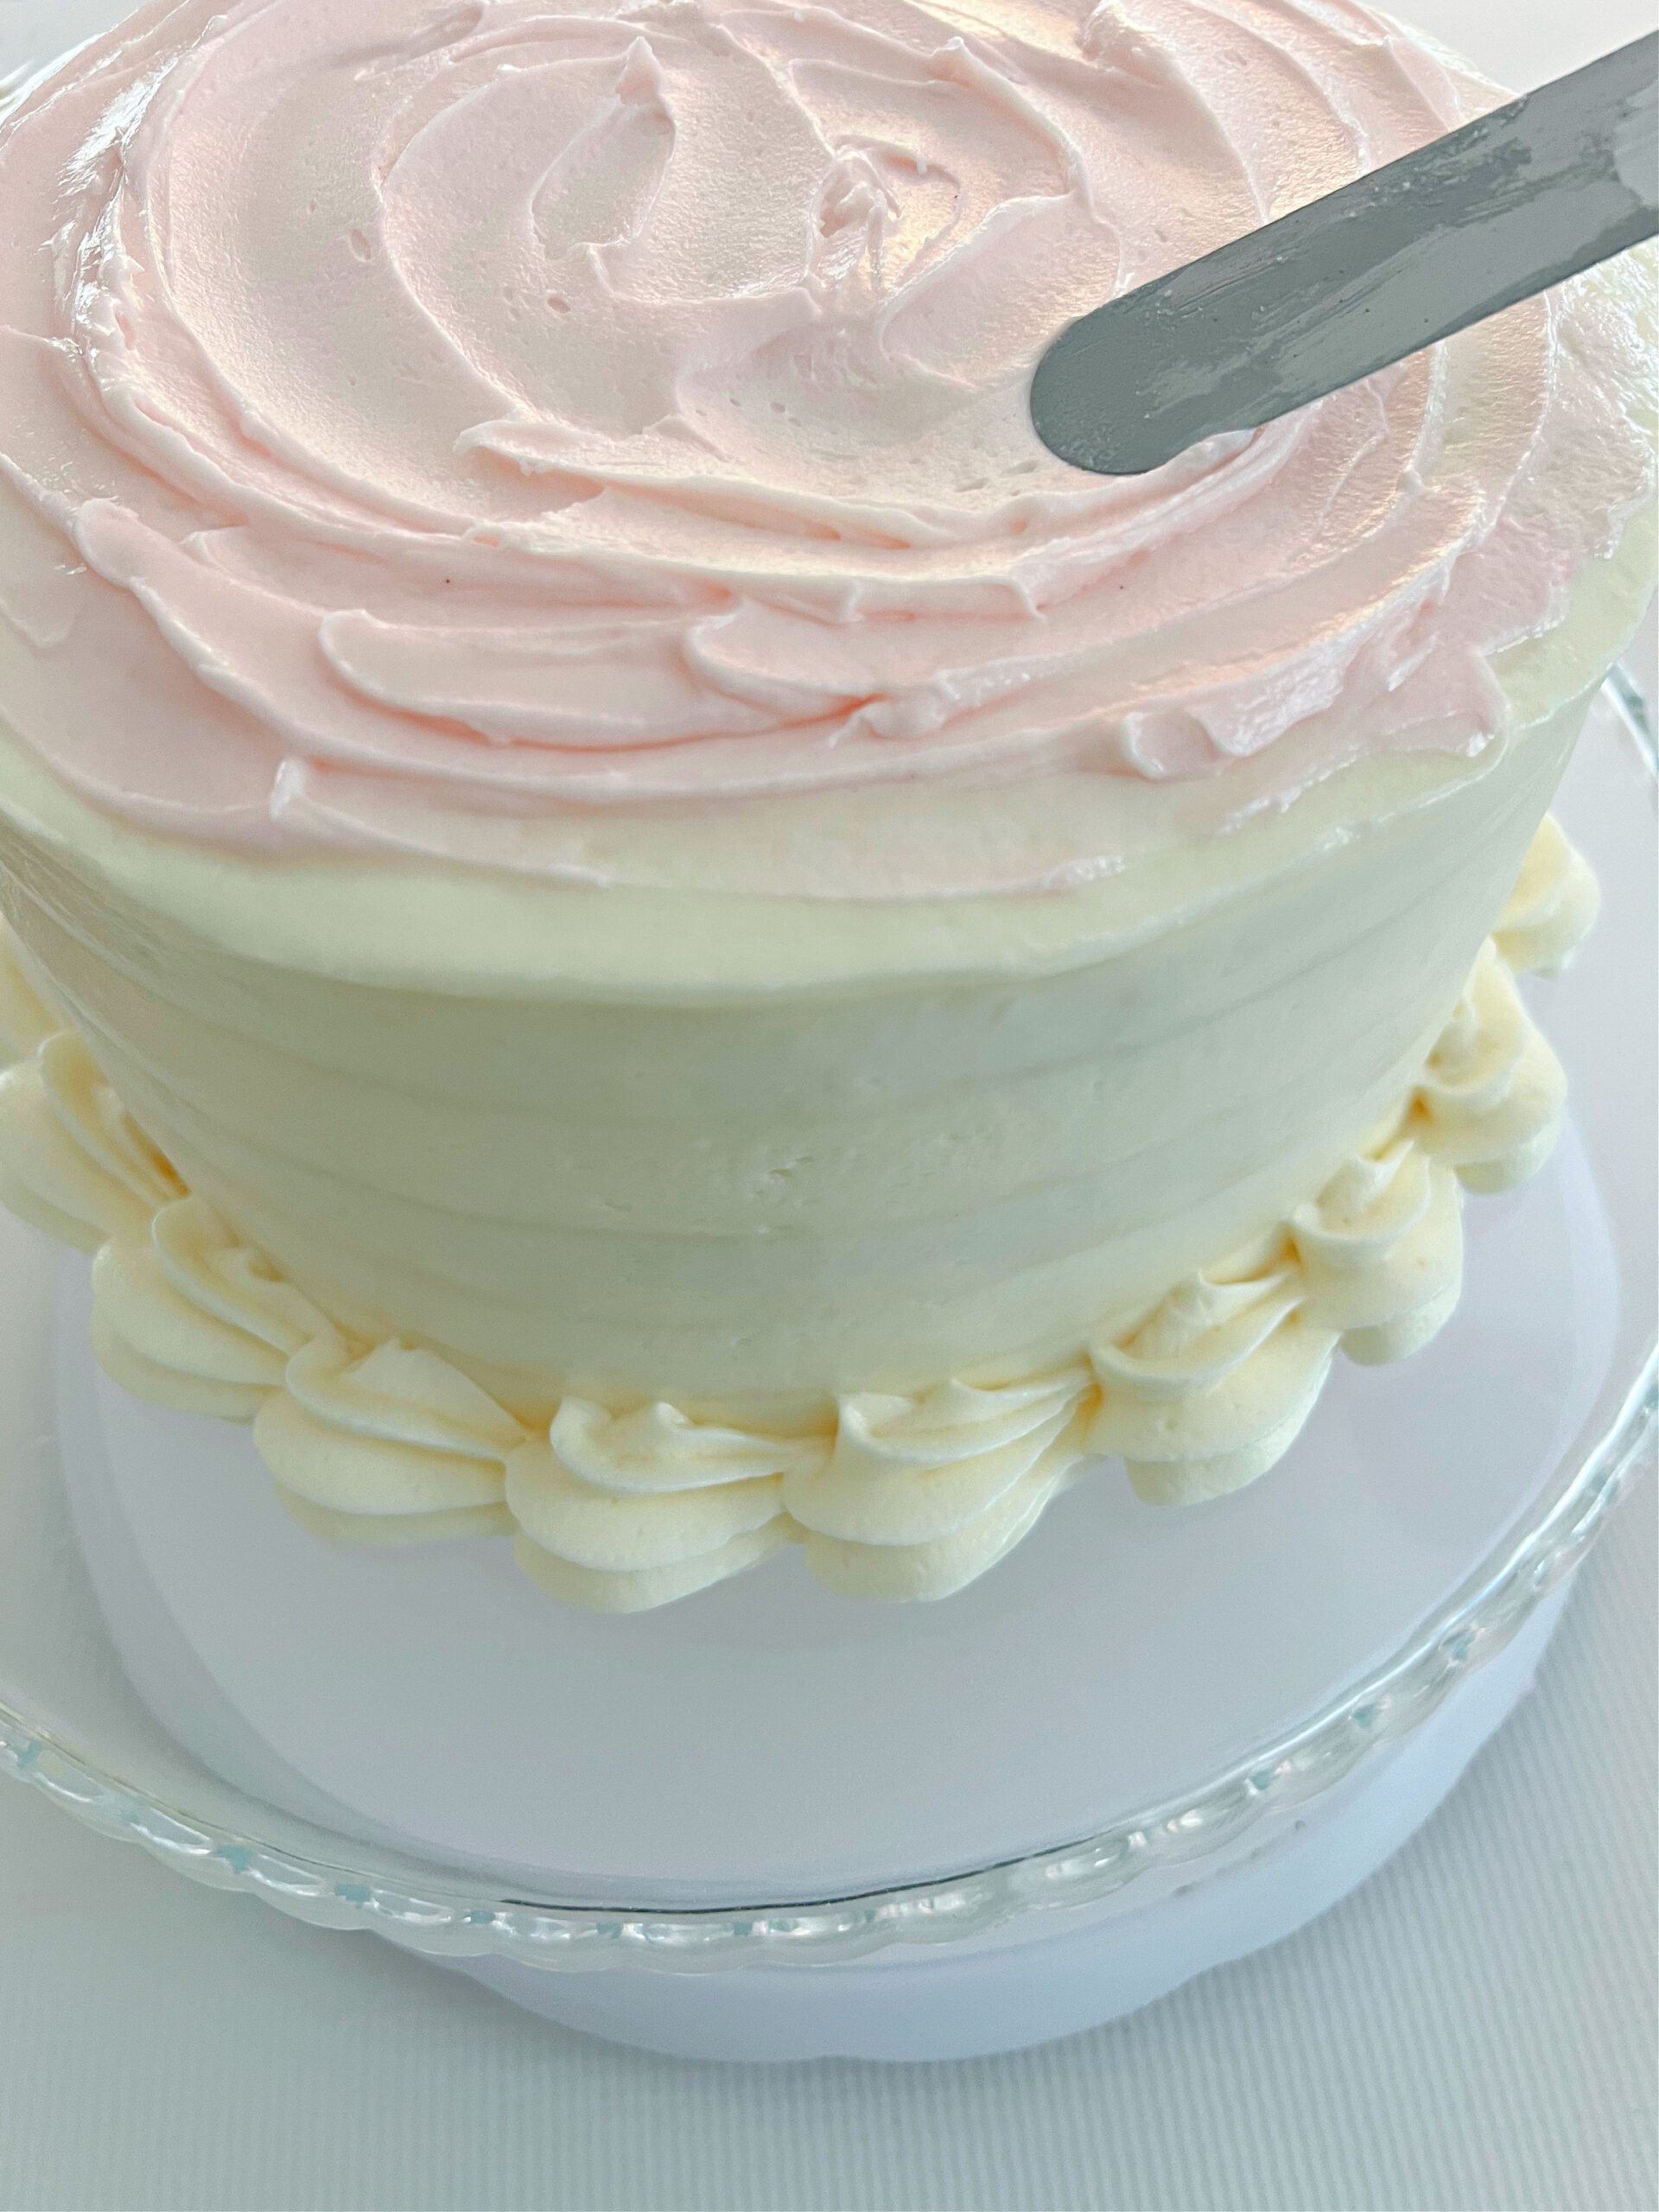 Swirling pink buttercream on top of the frosted cake.